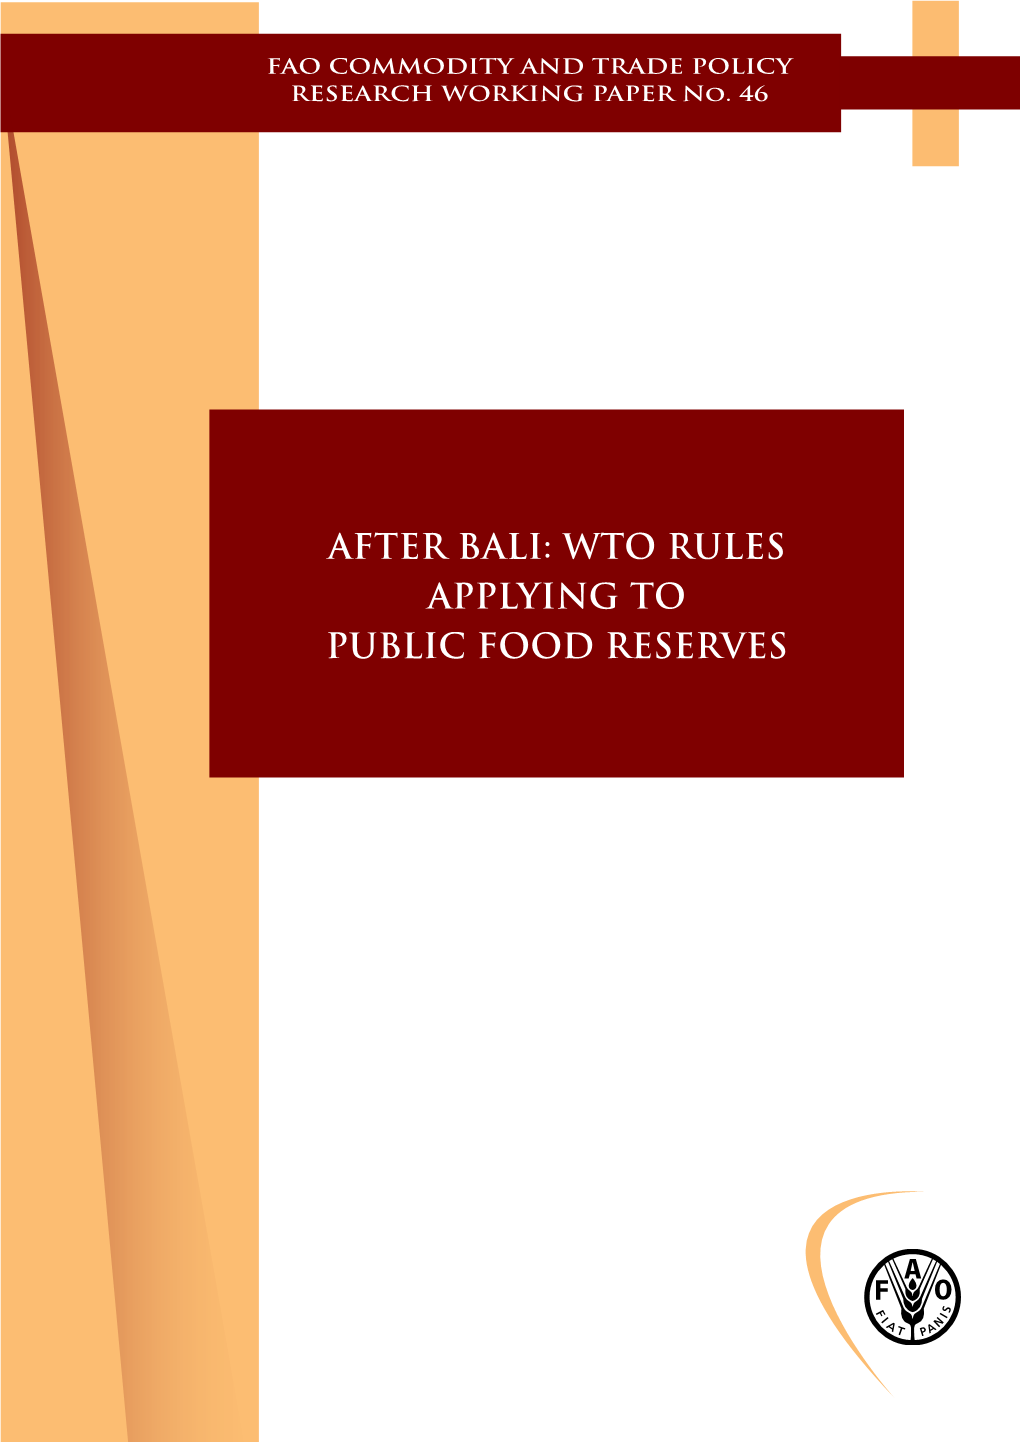 After Bali: WTO Rules Applying to Public Food Reserves